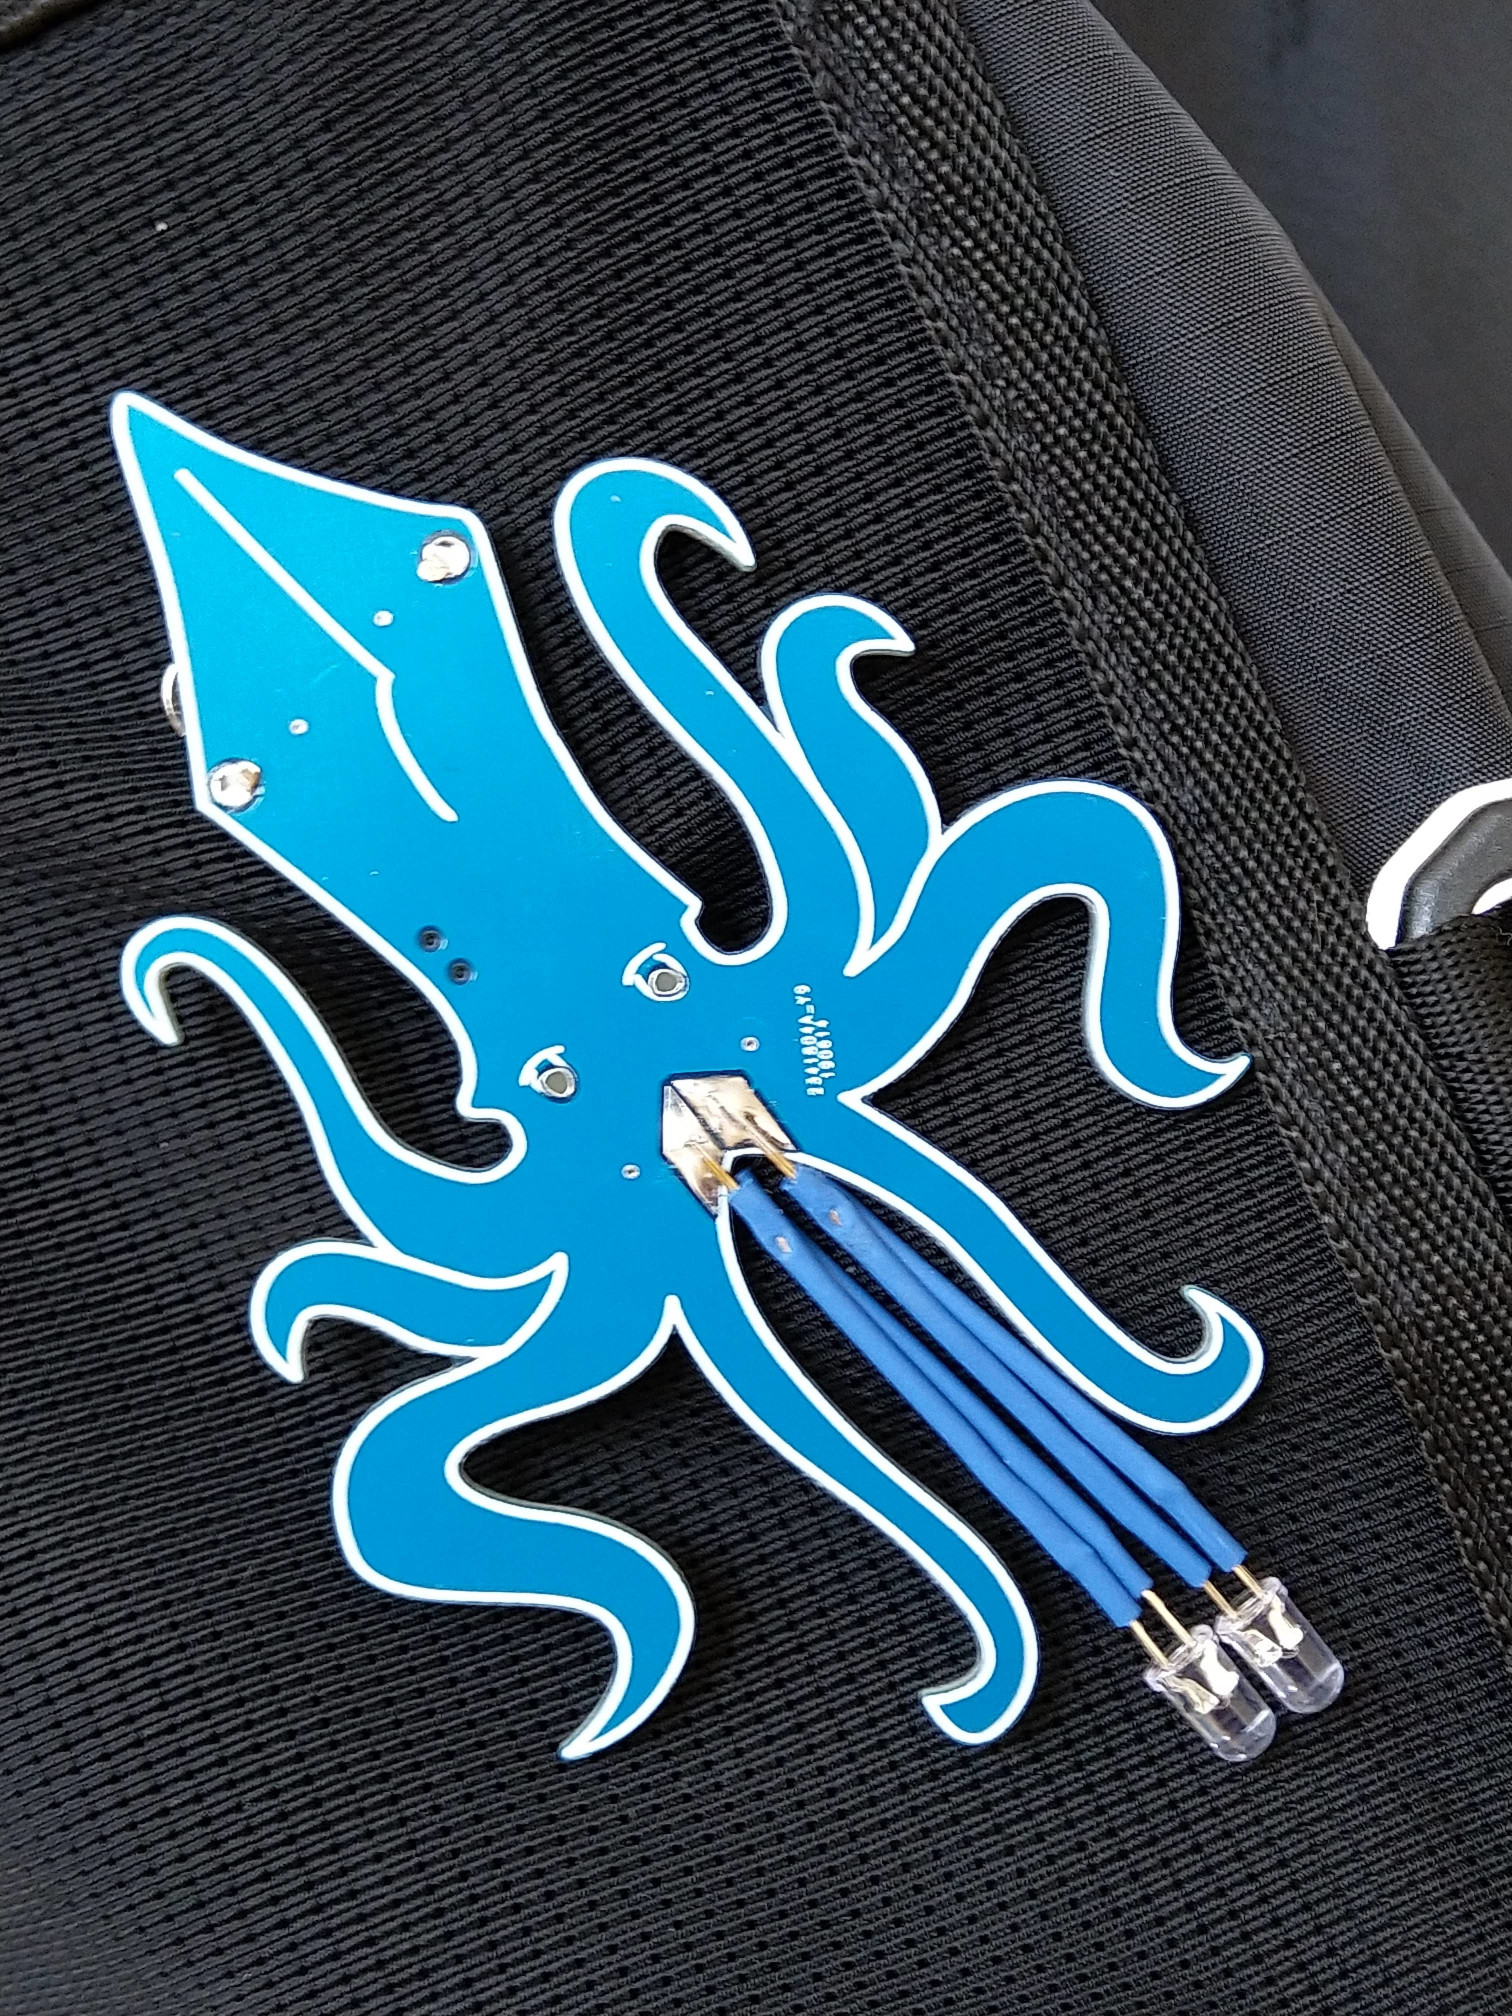 Squid on my backpack.